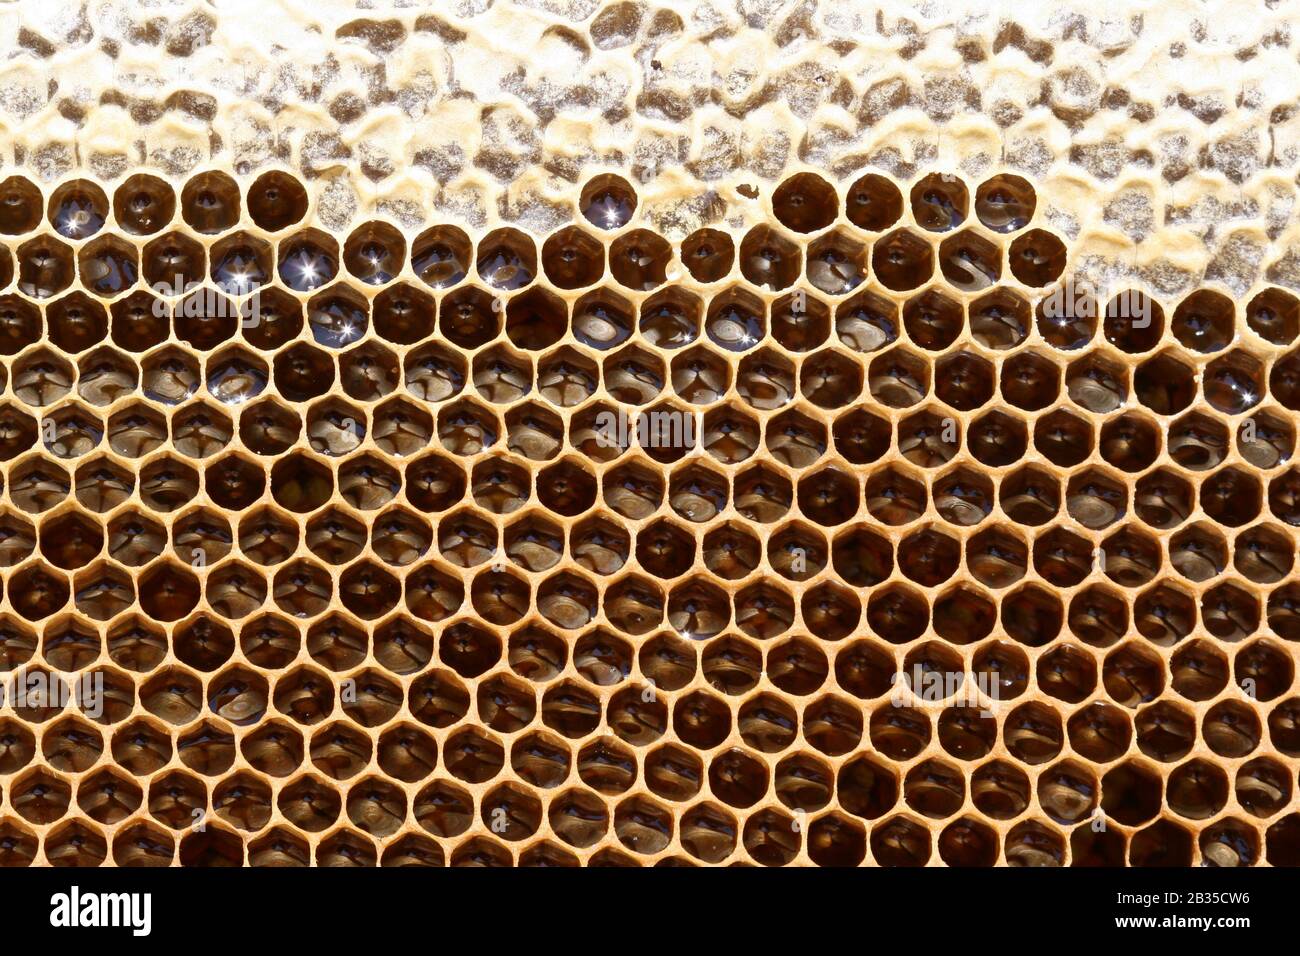 Golden Honey: closeup of fresh mature honey filled in the partly covered cells of a honeycomb Stock Photo